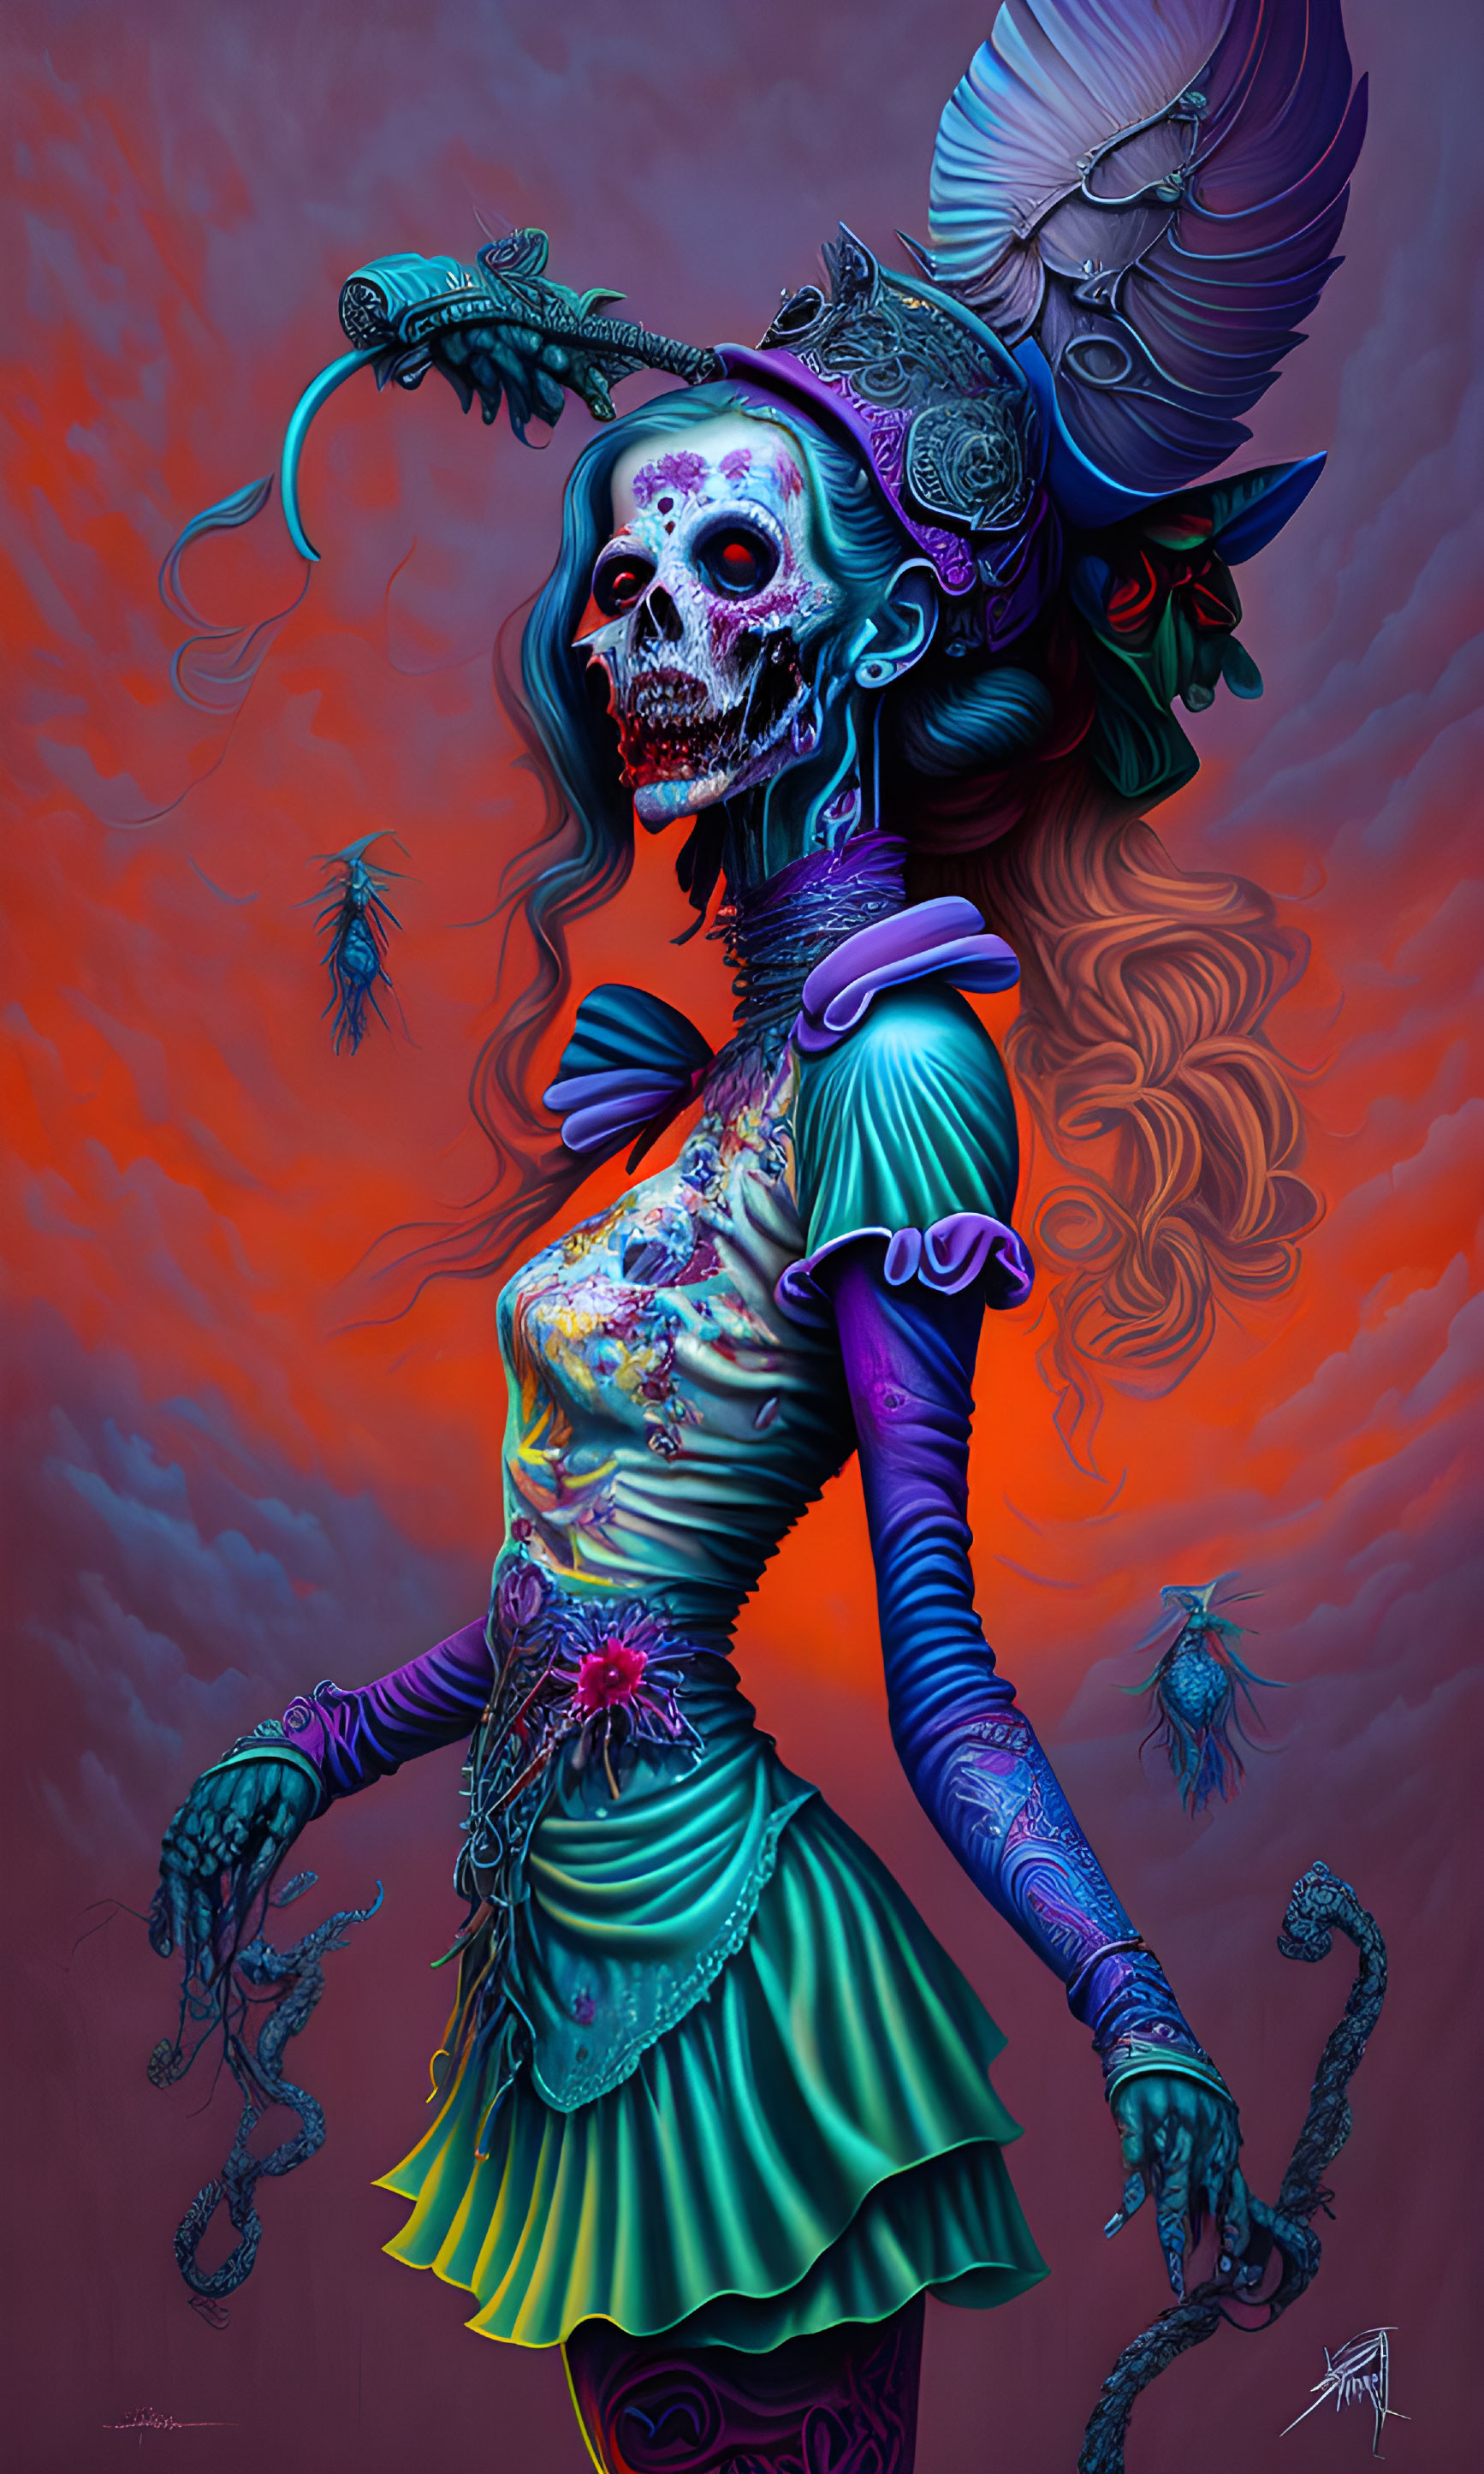 Colorful Skeletal Figure with Tentacles in Moody Sky with Owl